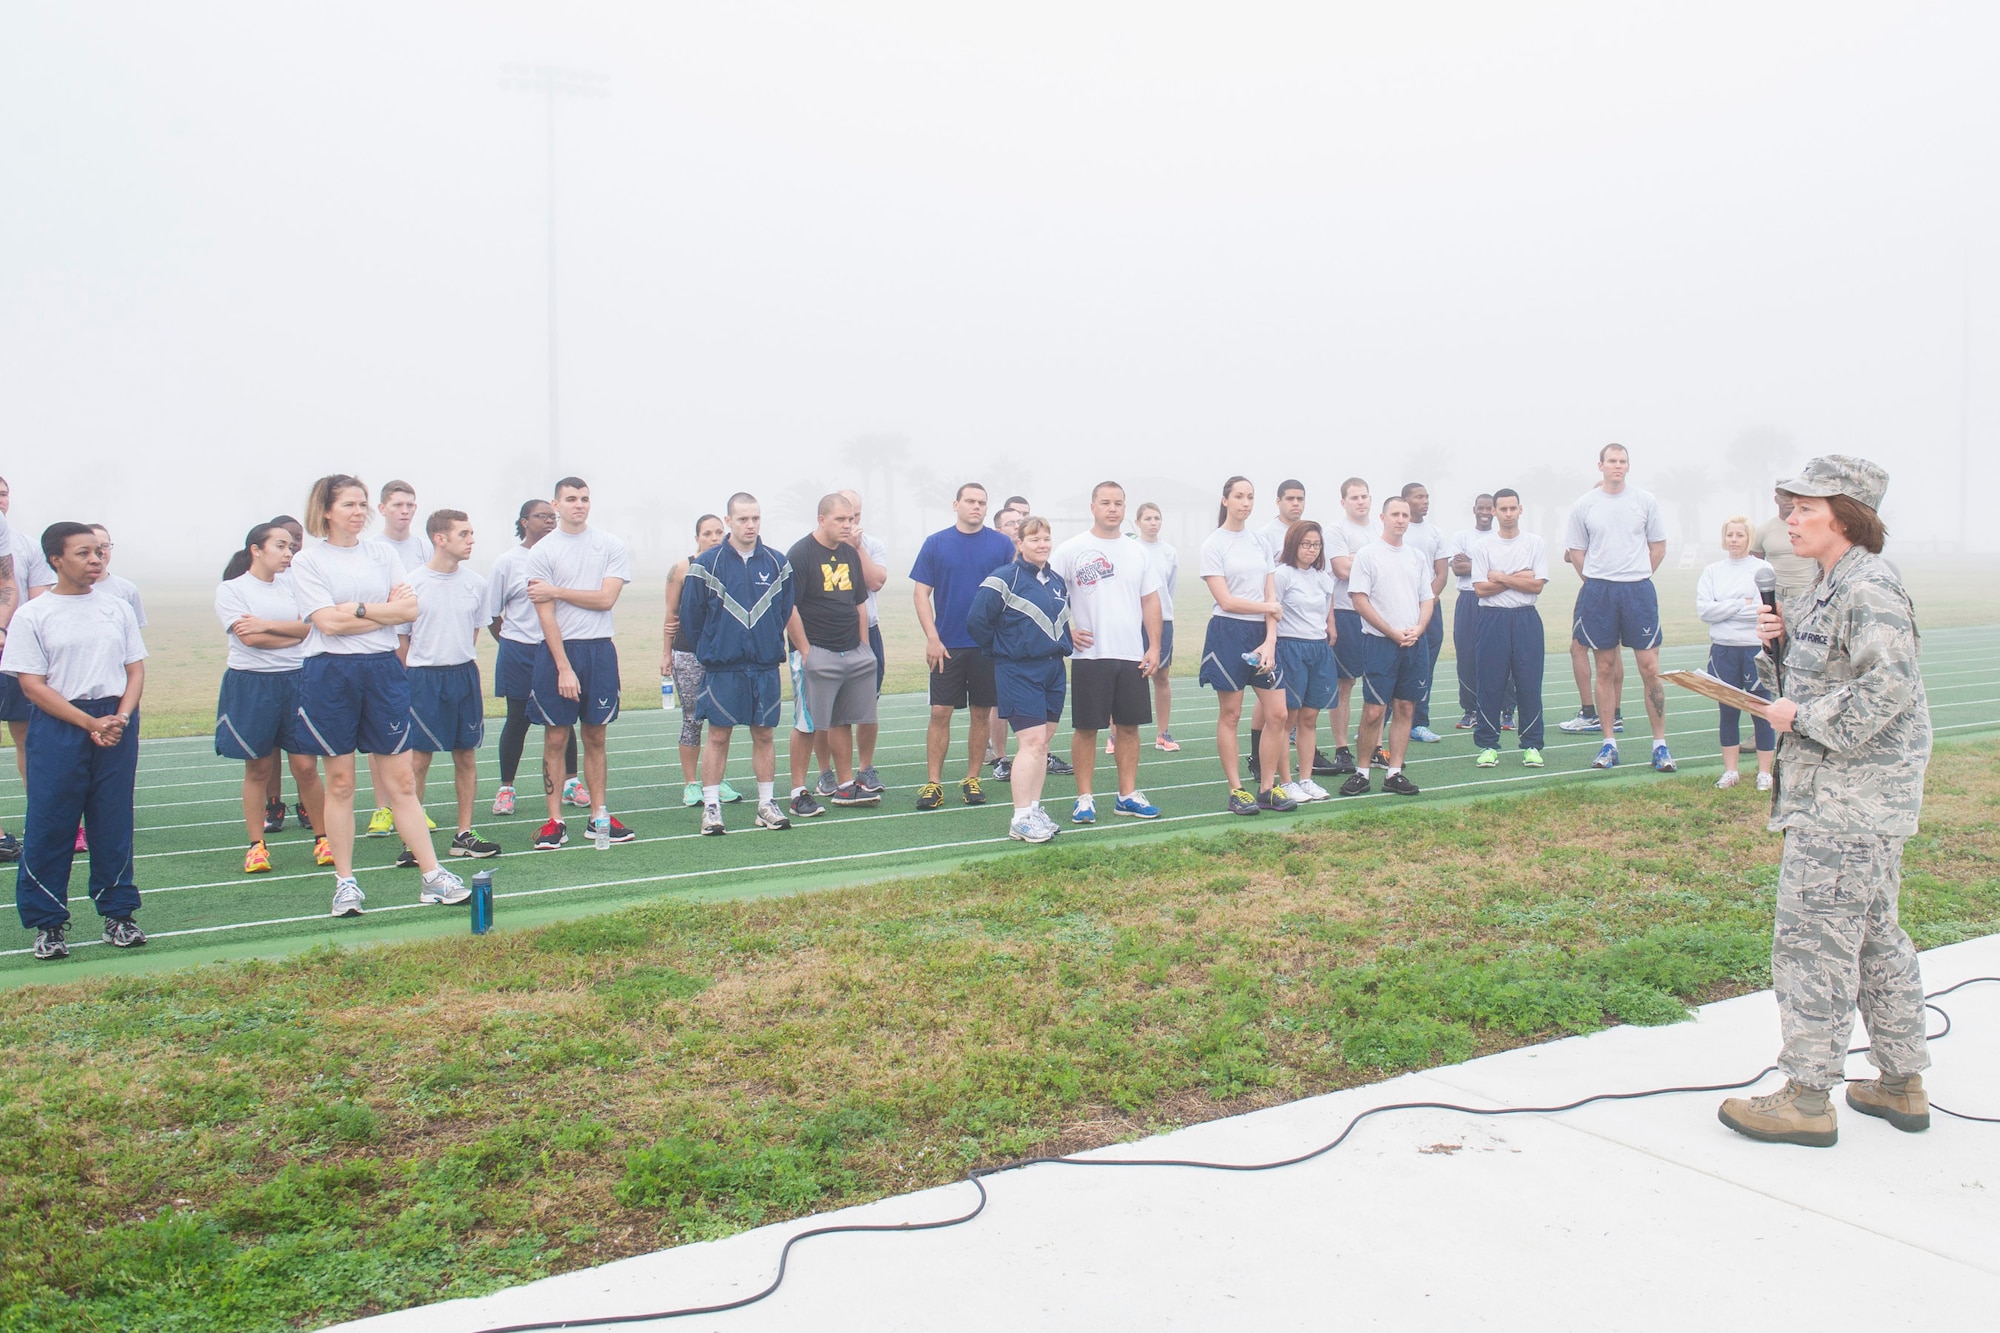 Col. Julie Stola, 45th Medical Group commander, provides opening remarks for the Women’s History Kick-off Obstacle Course event March 2, 2015 at Warfit Field, Patrick Air Force Base, Fla. (U.S. Air Force photo/Matthew Jurgens)